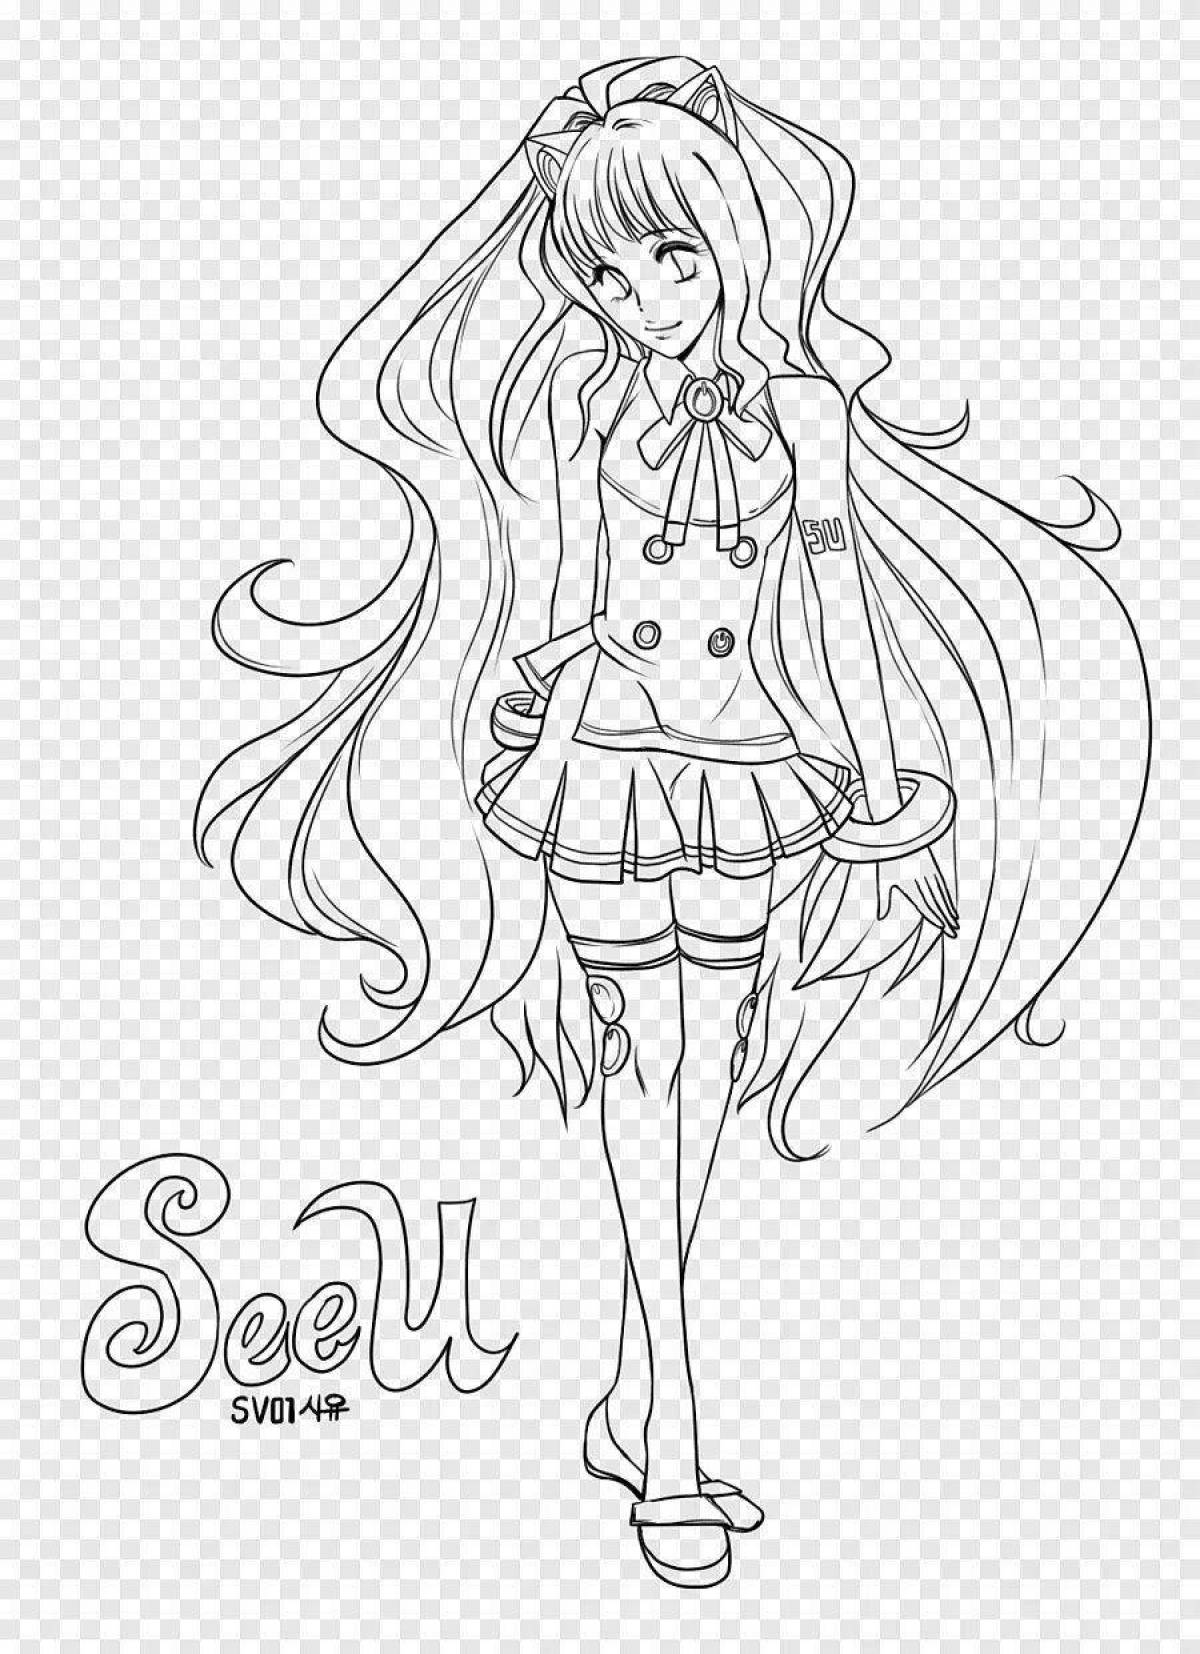 Colorful vocaloid coloring page